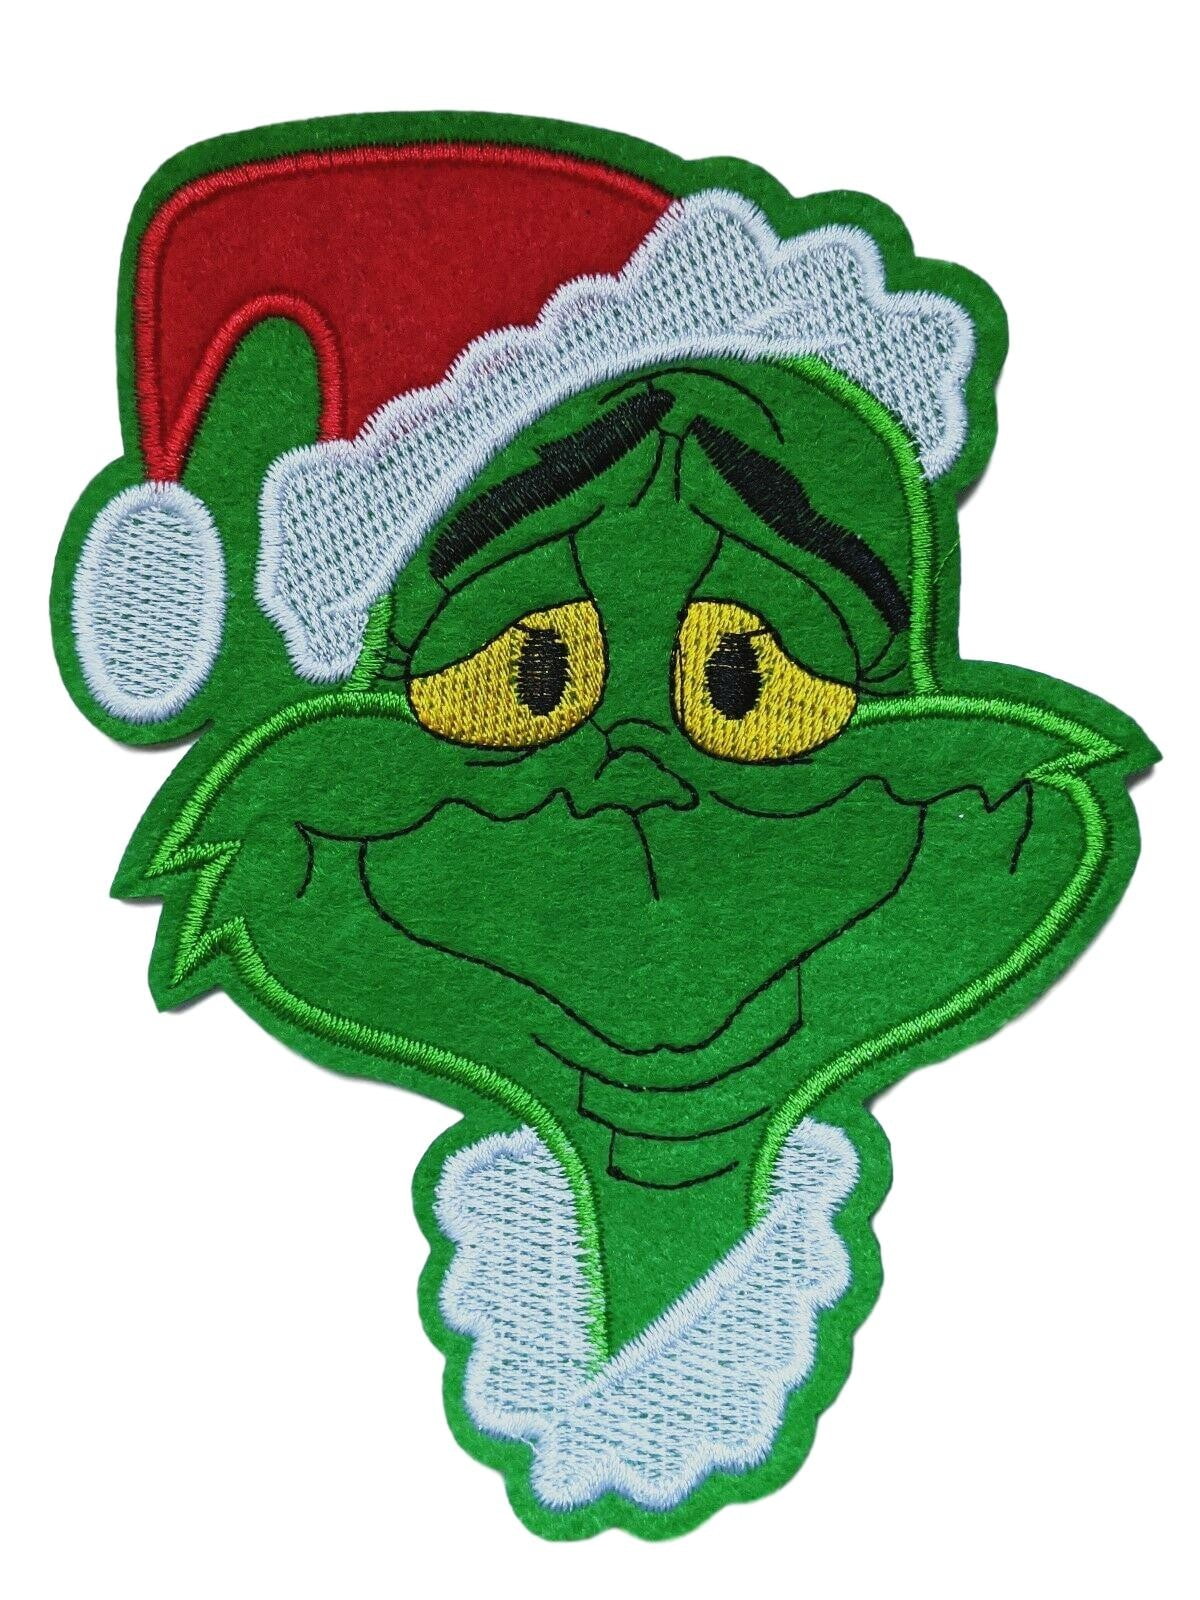 The Grinch Cartoon Character 6 Inches Tall Embroidered Iron On